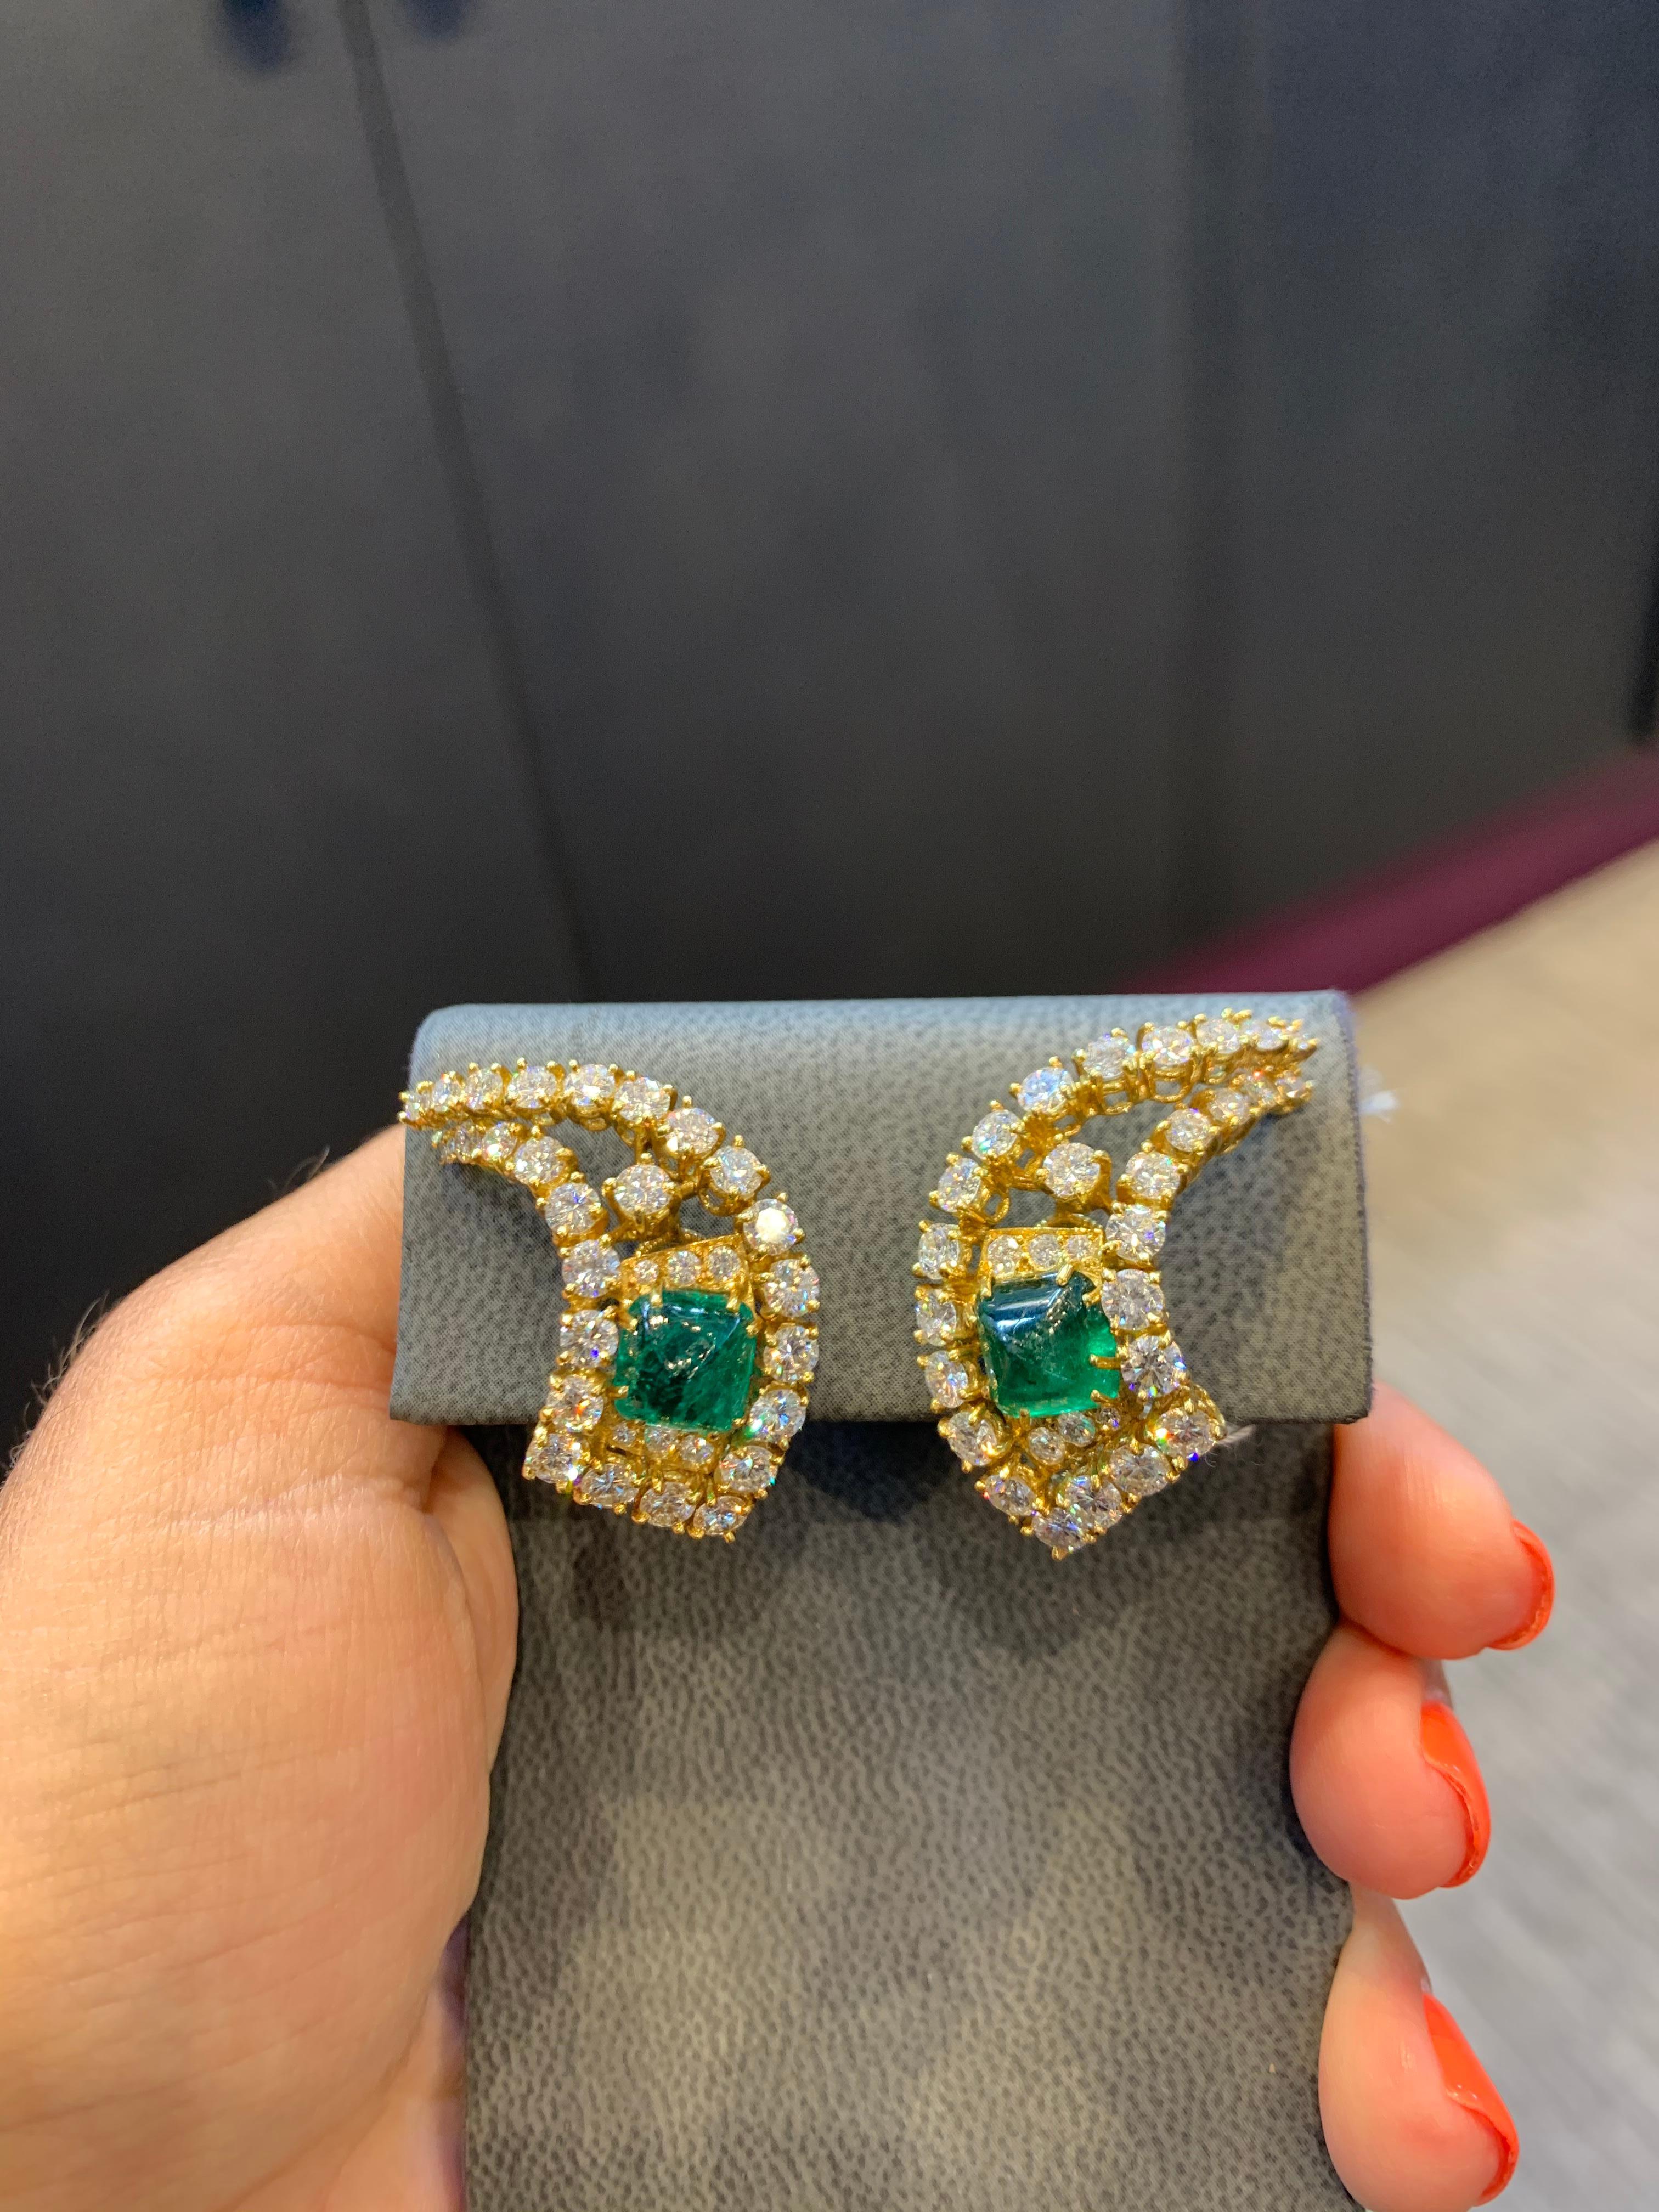 Gerard Emerald And Diamond Gold Earrings 
Approx: 5.30 Cts of Emeralds
Approx: 6.70 Cts of Diamonds
Back Type: Clip on 
Signed, M Gerard
Serial Number: 4299
